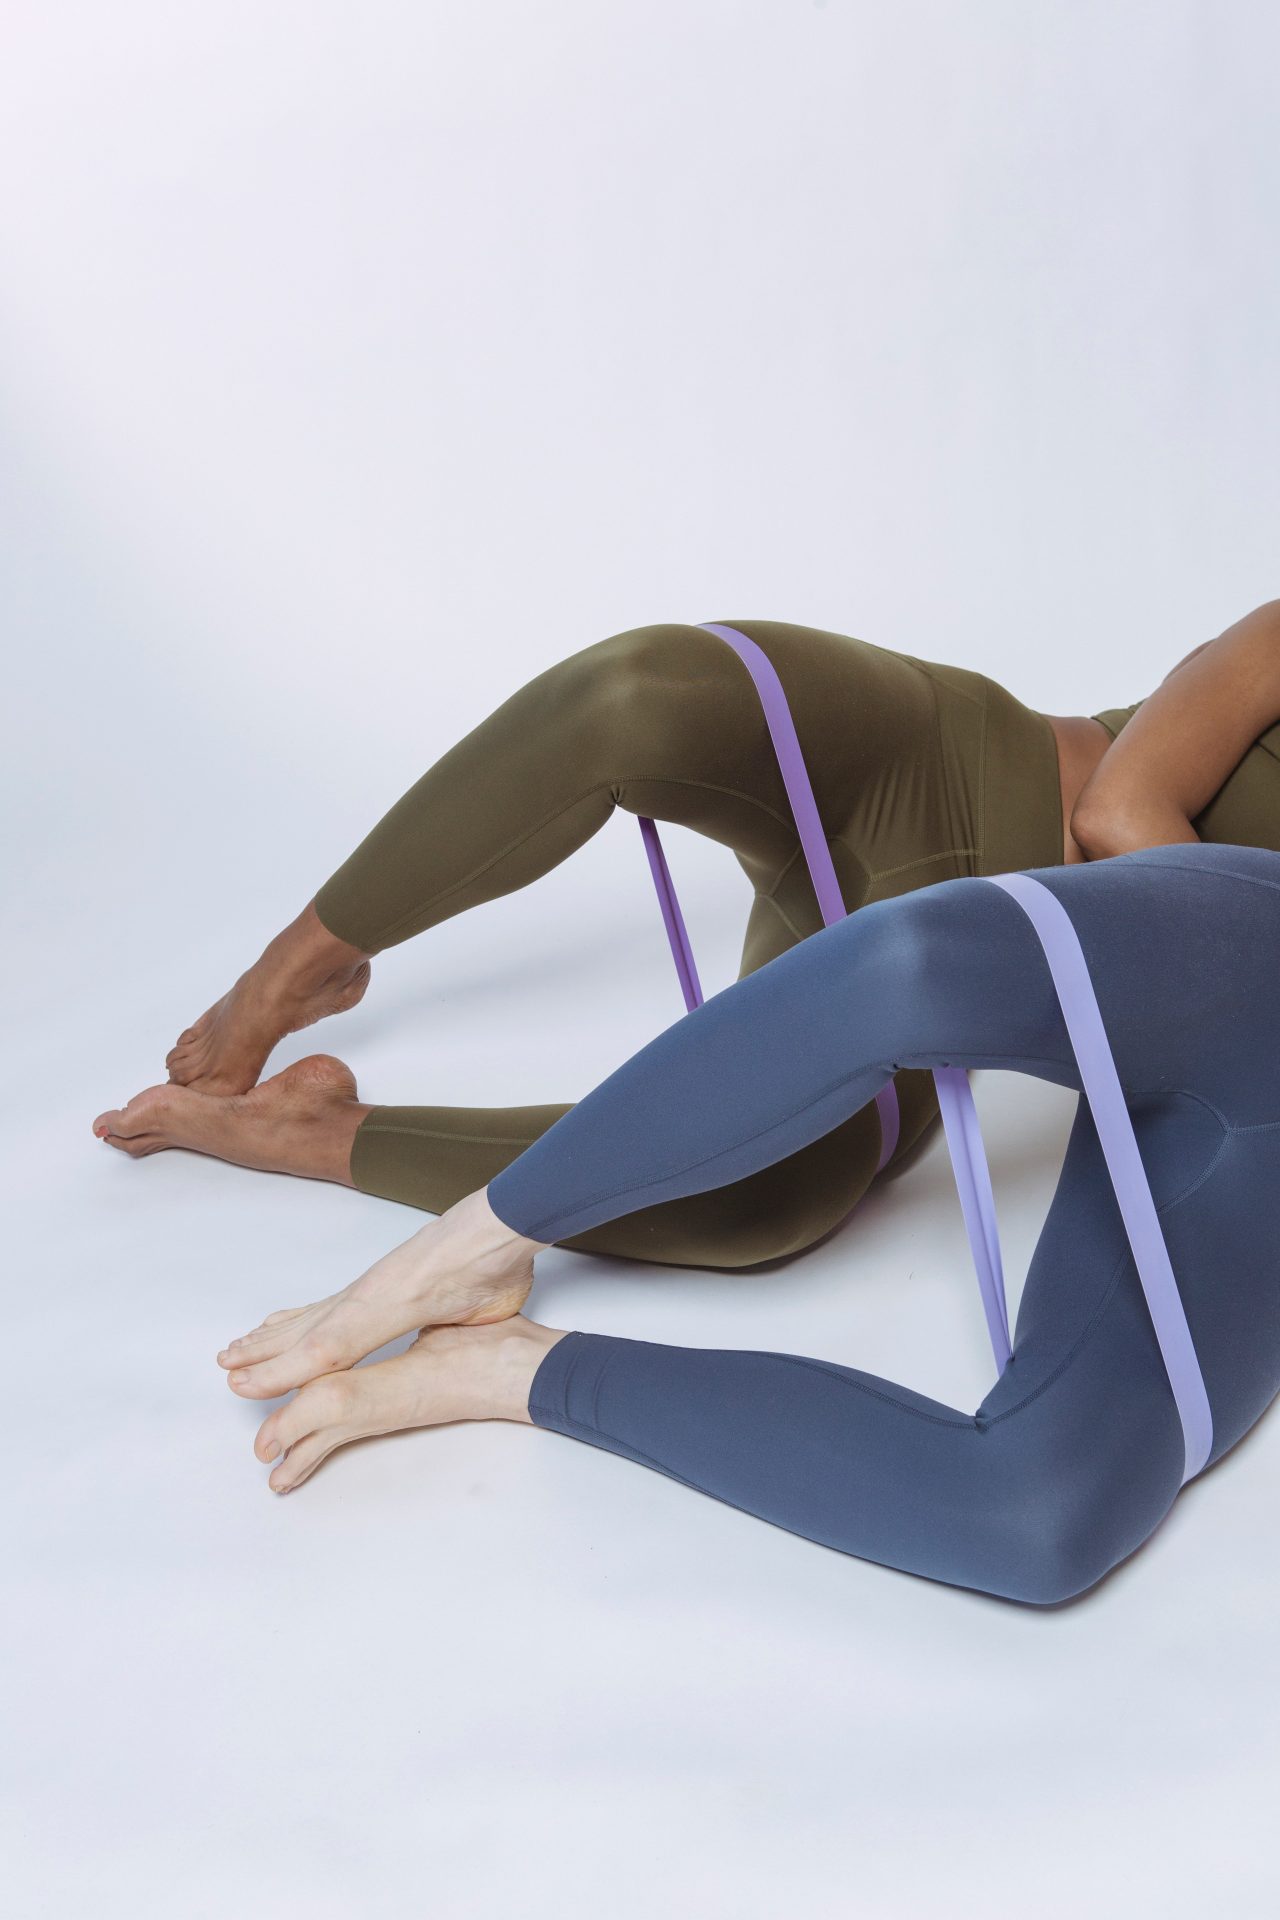 gluteus medius stretch physical therapy